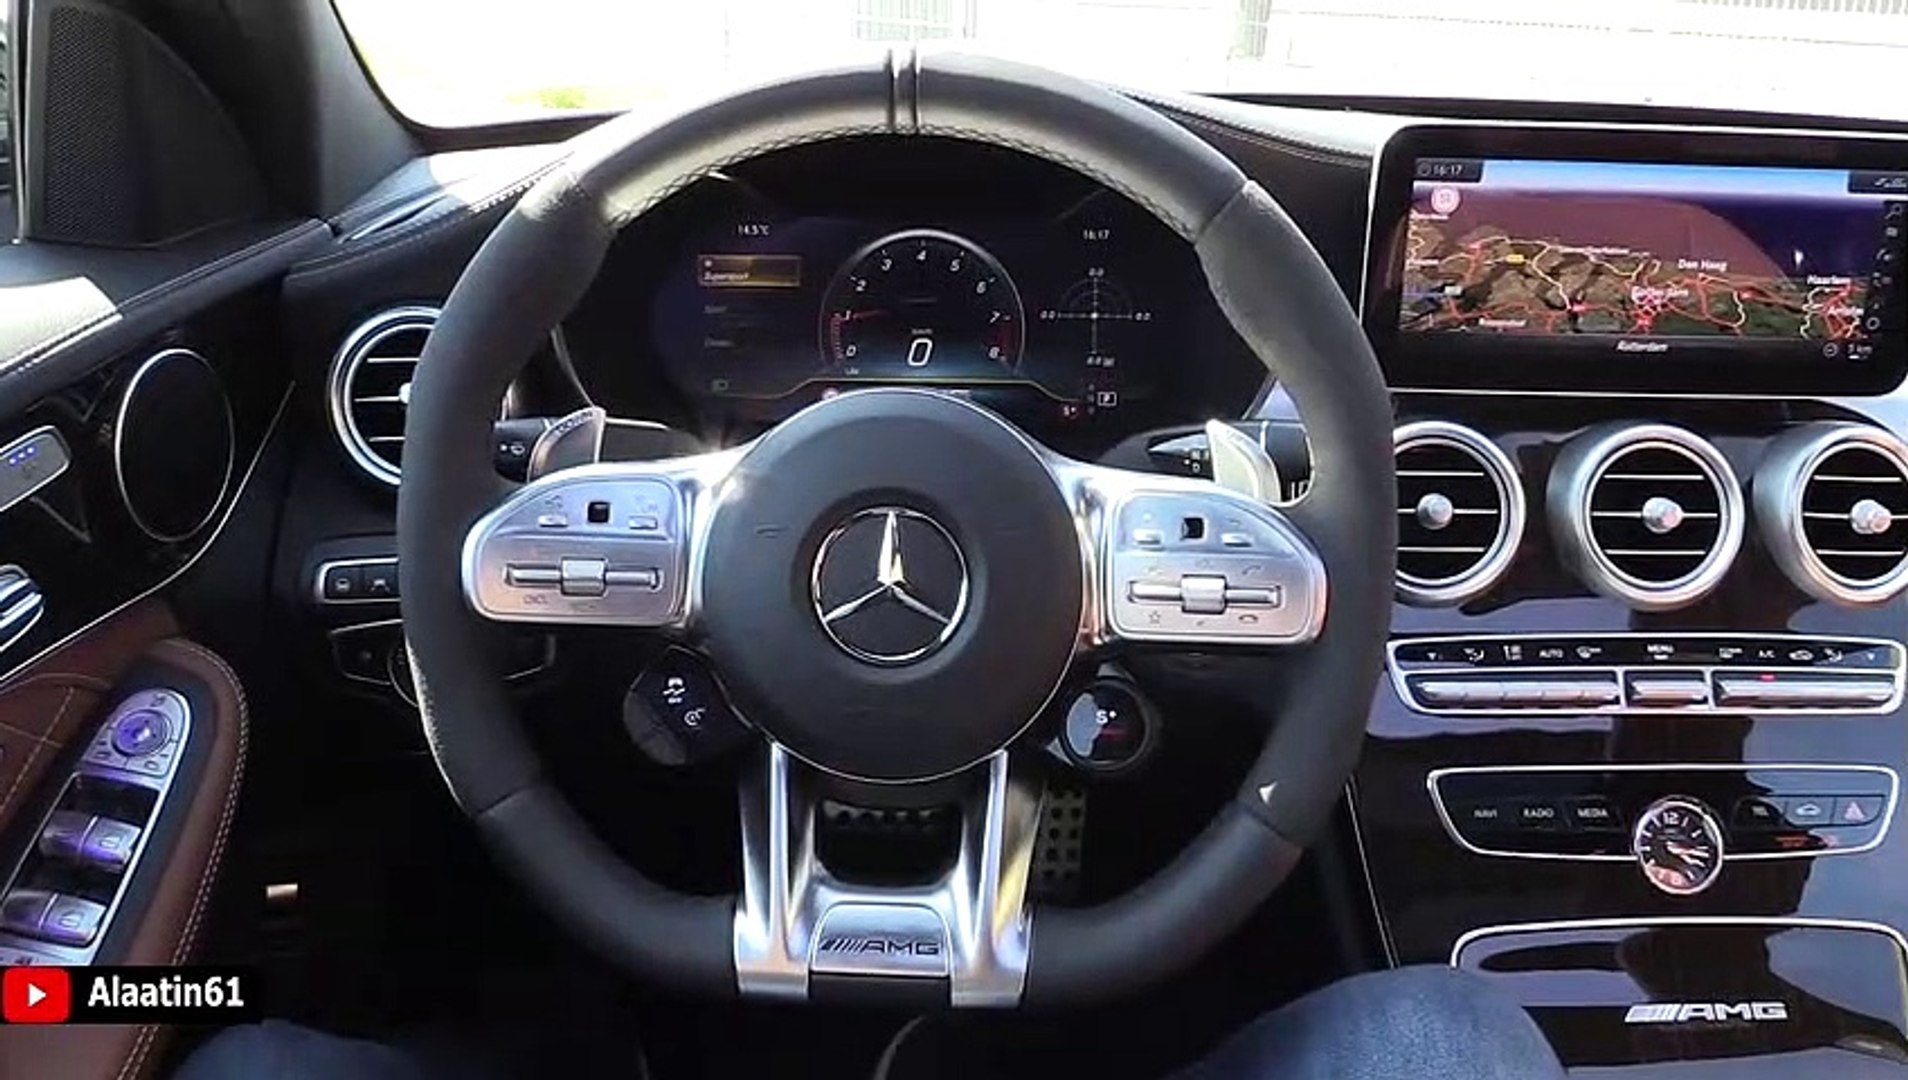 19 Mercedes Amg C63 S Review Sound Exhaust Interior Exterior Dailymotion Video